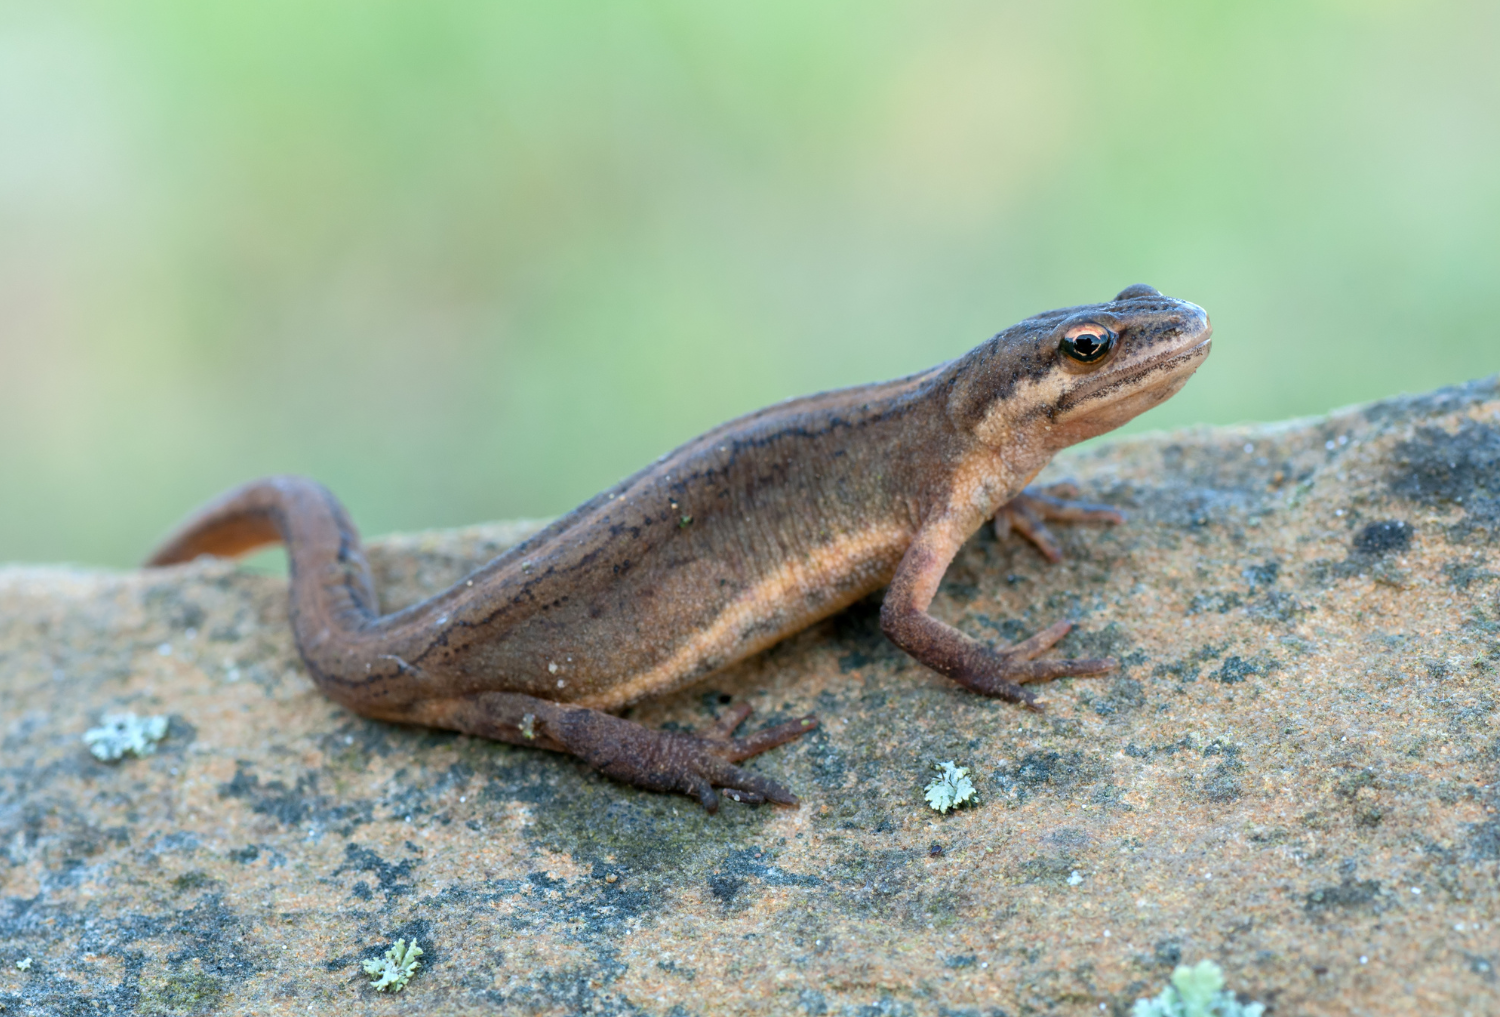 A smooth newt resting on a rock with lichen on it.